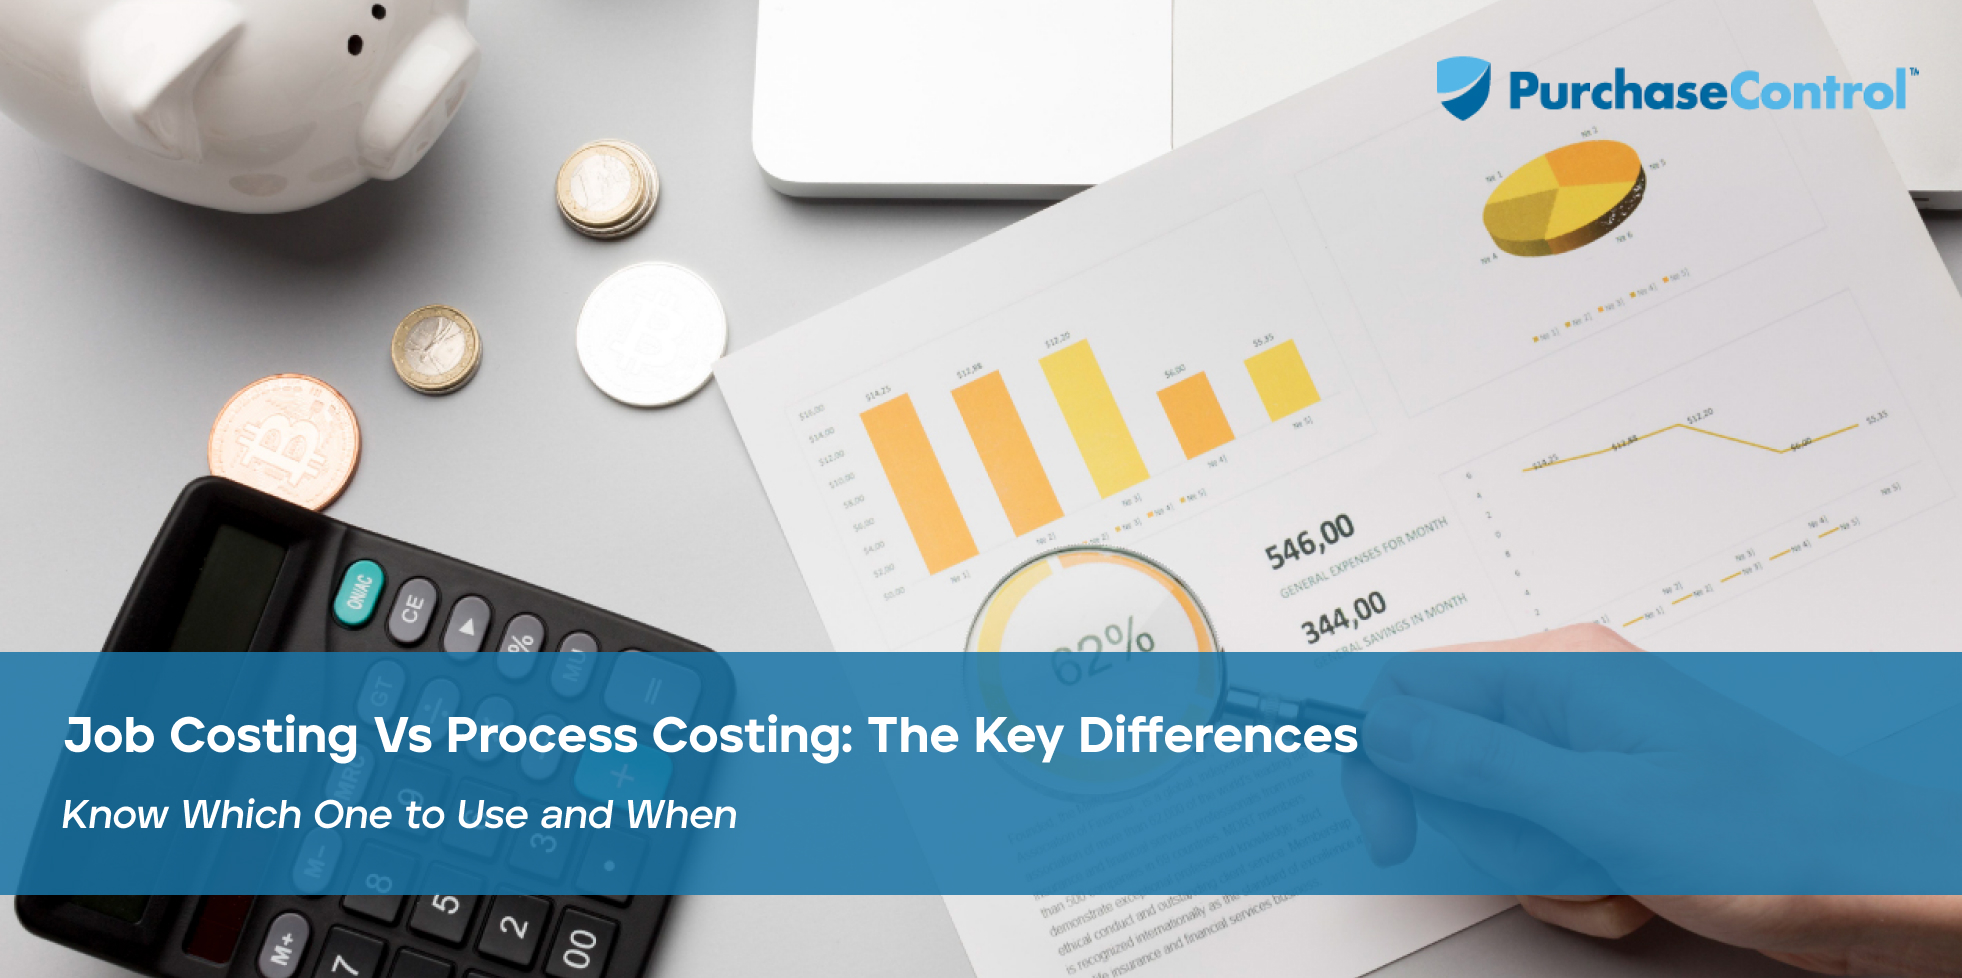 Job-Costing-Vs-Process-Costing-The-Key-Differences